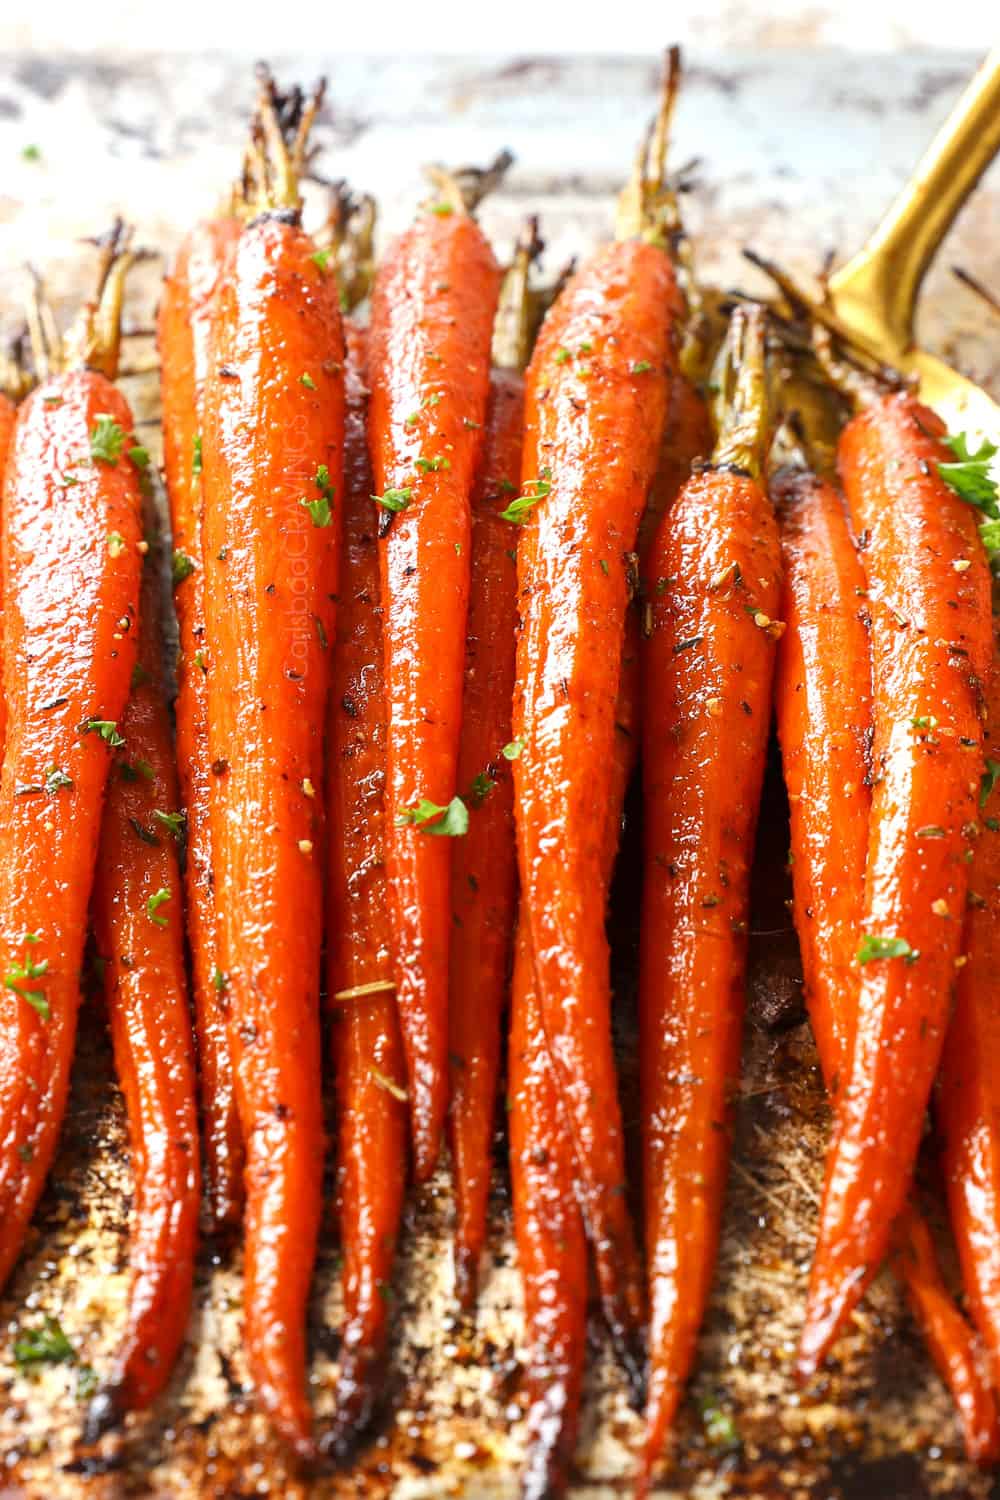 tossing oven roasted carrots in balsamic sauce